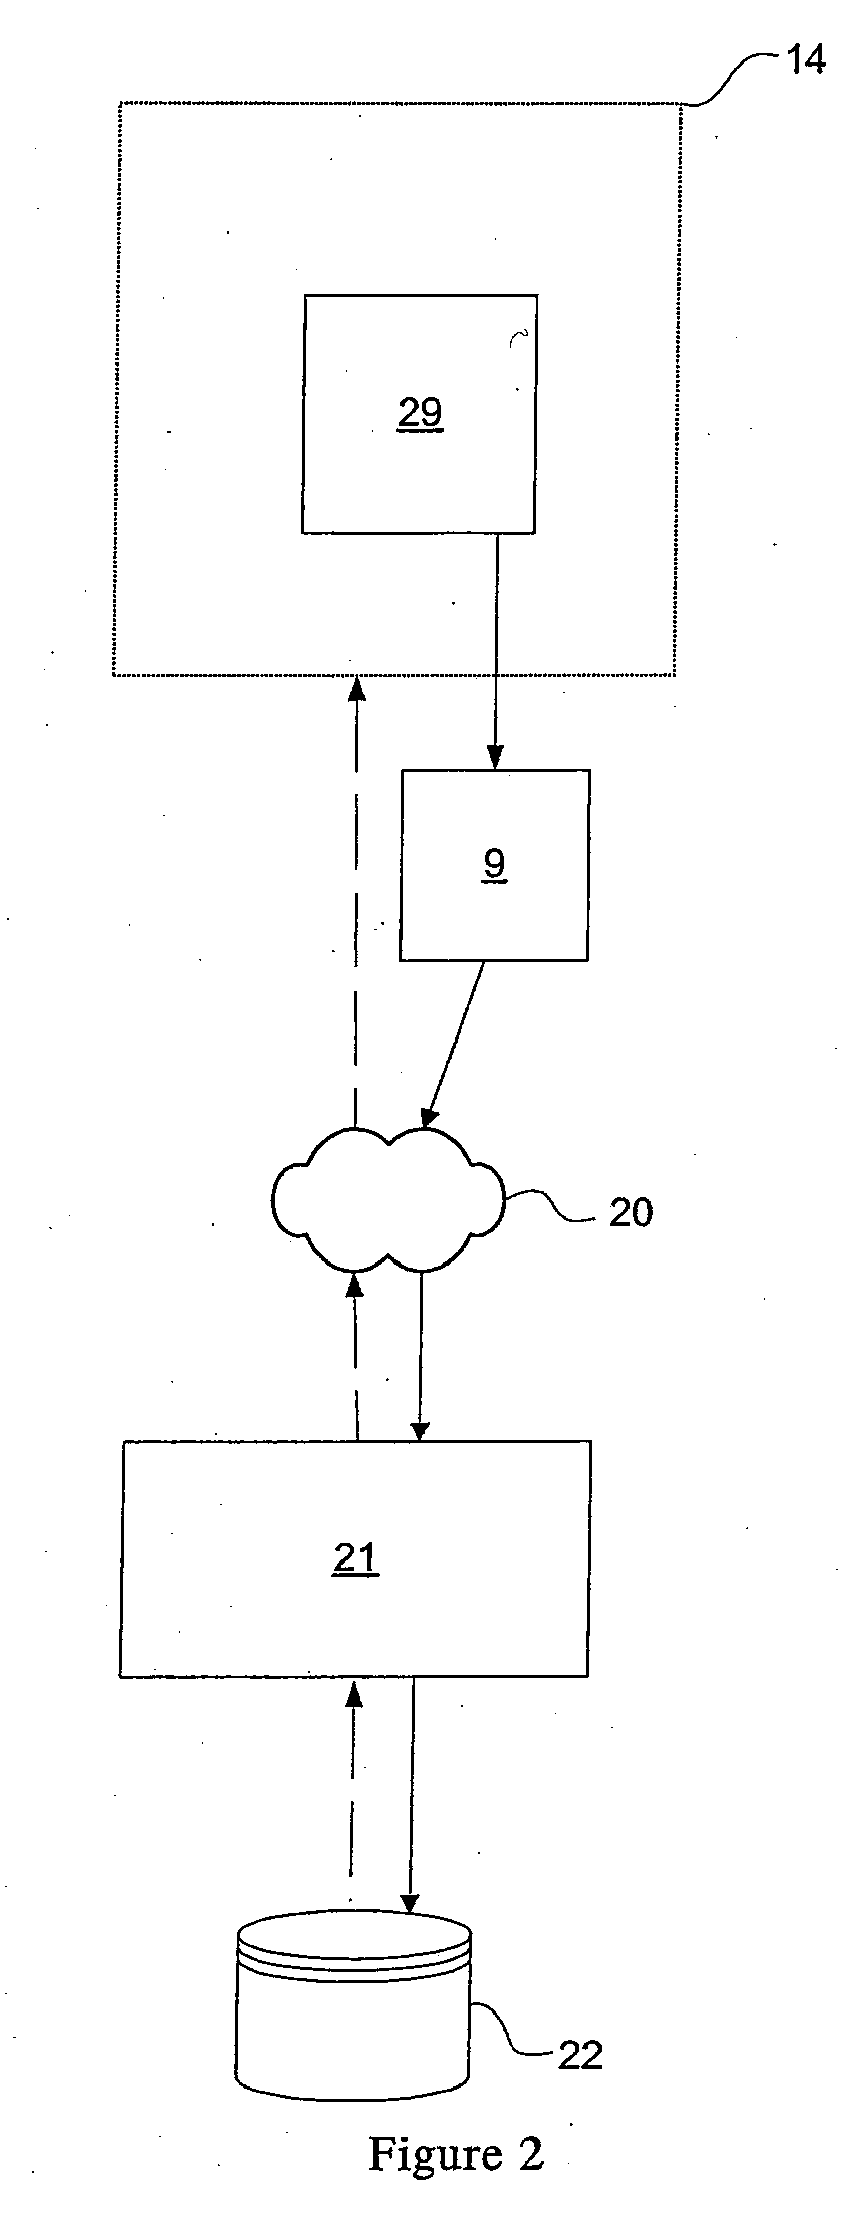 Delivery of Electronic Documents Into a Postal Network